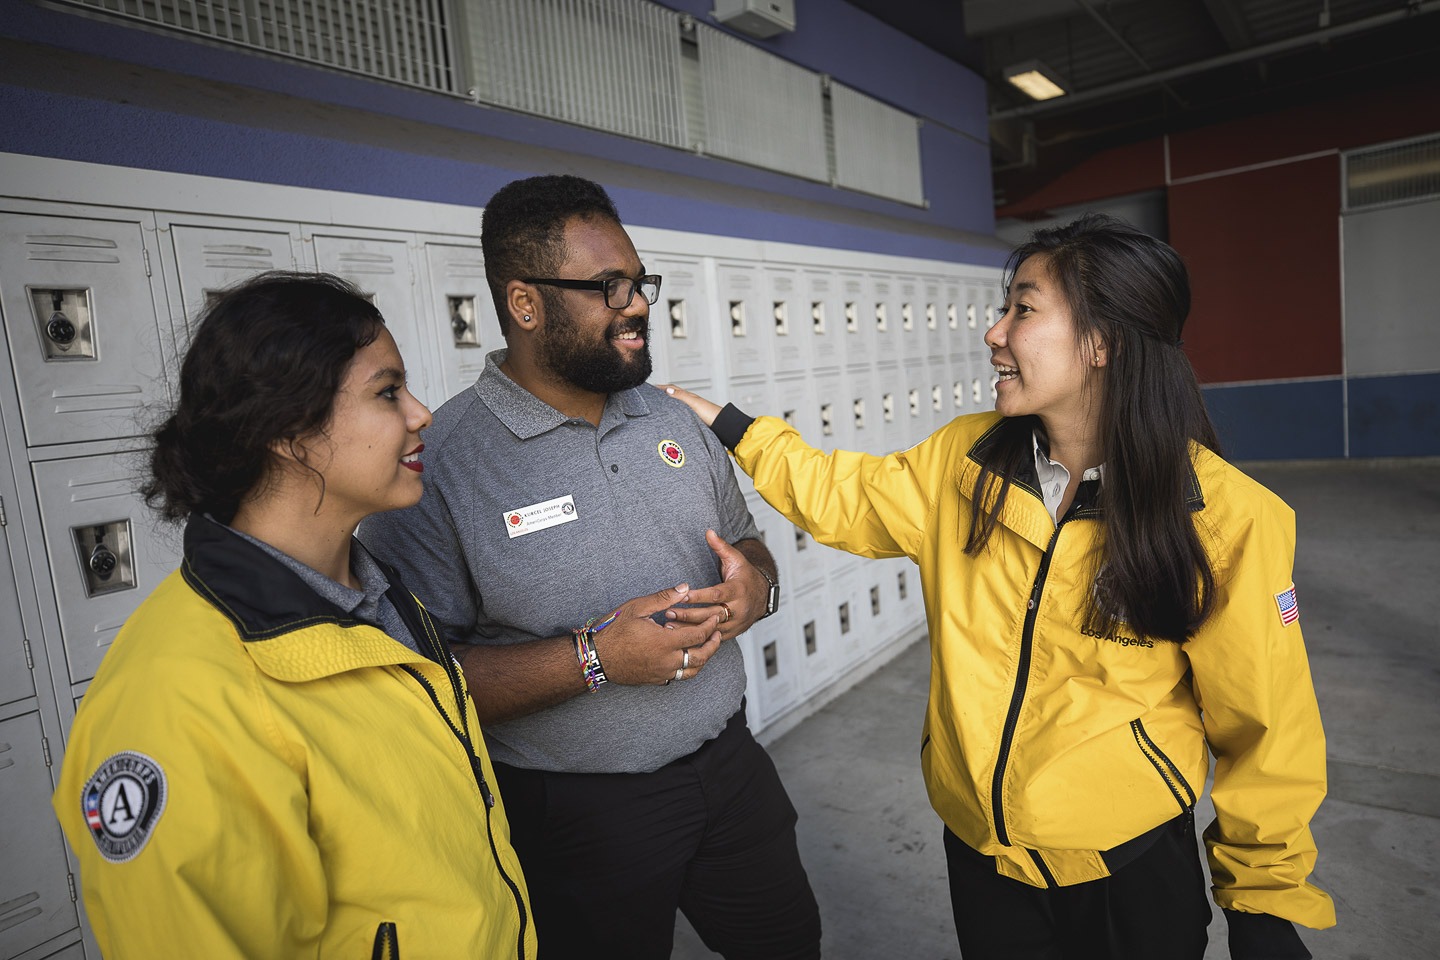 Three AmeriCorps members standing in front of lockers, talking